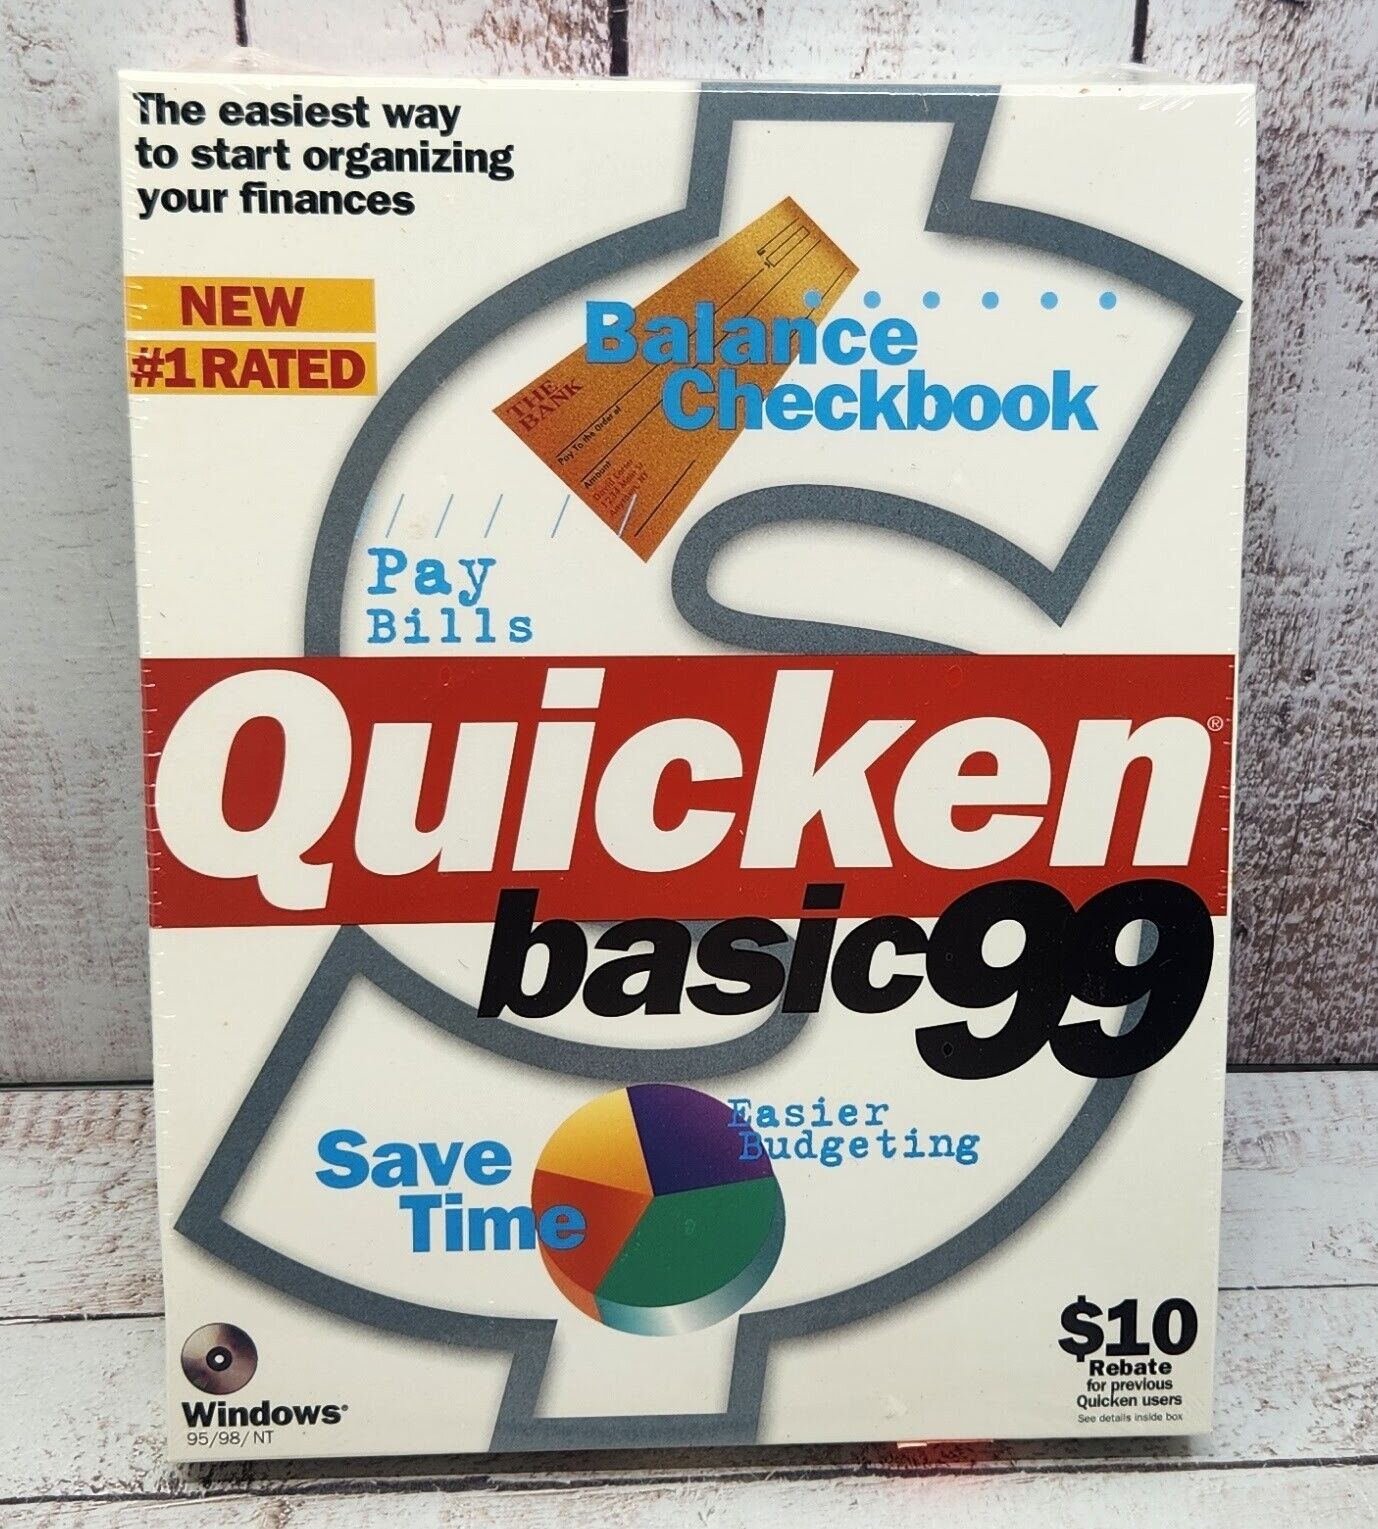 1999 Sealed Quicken Basic 99 CD for Windows 95/98 or NT - BRAND NEW SEALED